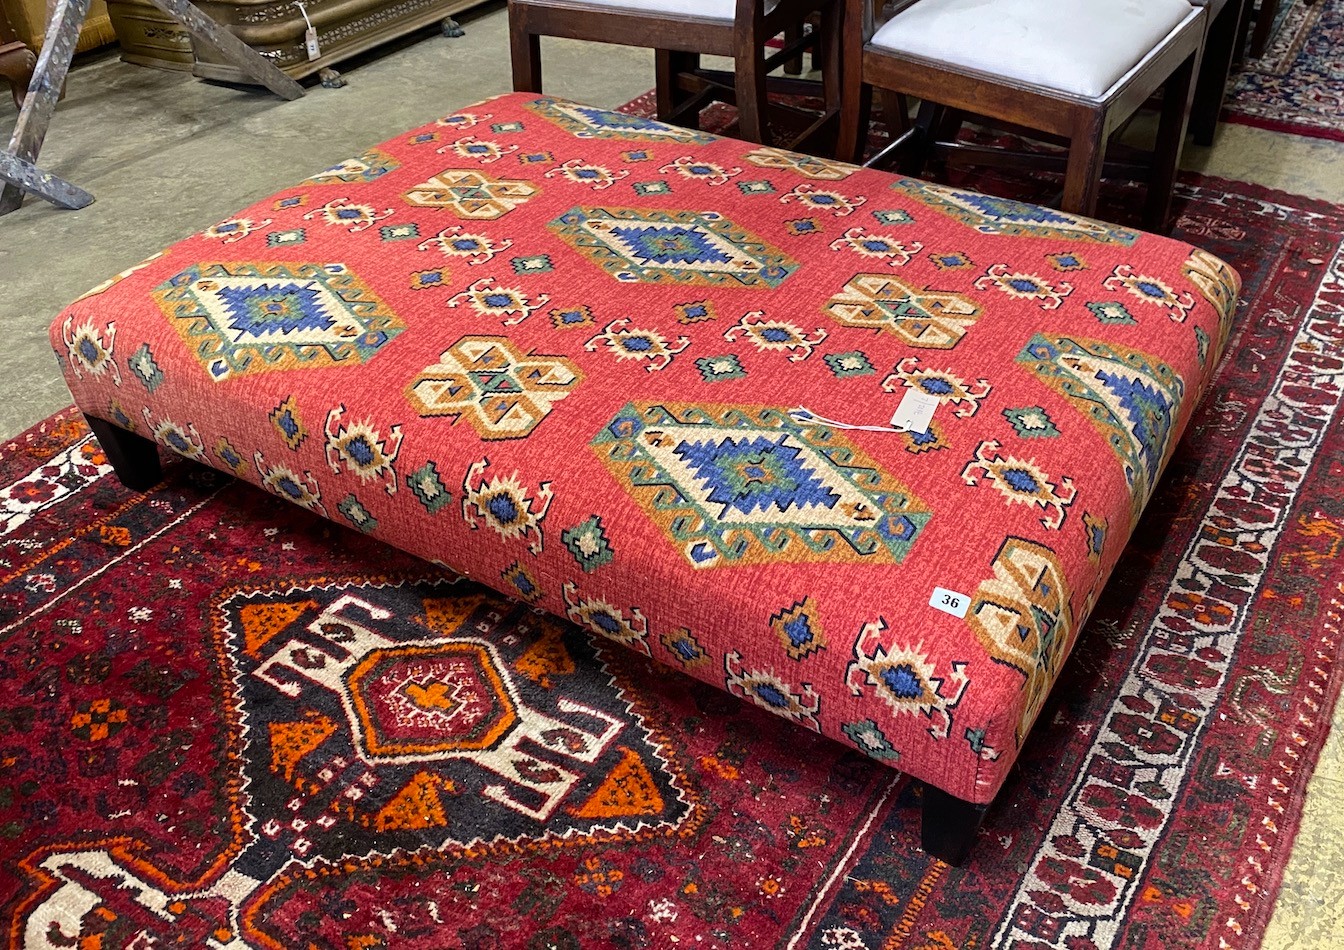 A large rectangular contemporary footstool upholstered in Kilim style fabric, length 122cm, depth 90cm, height 28cm                                                                                                         